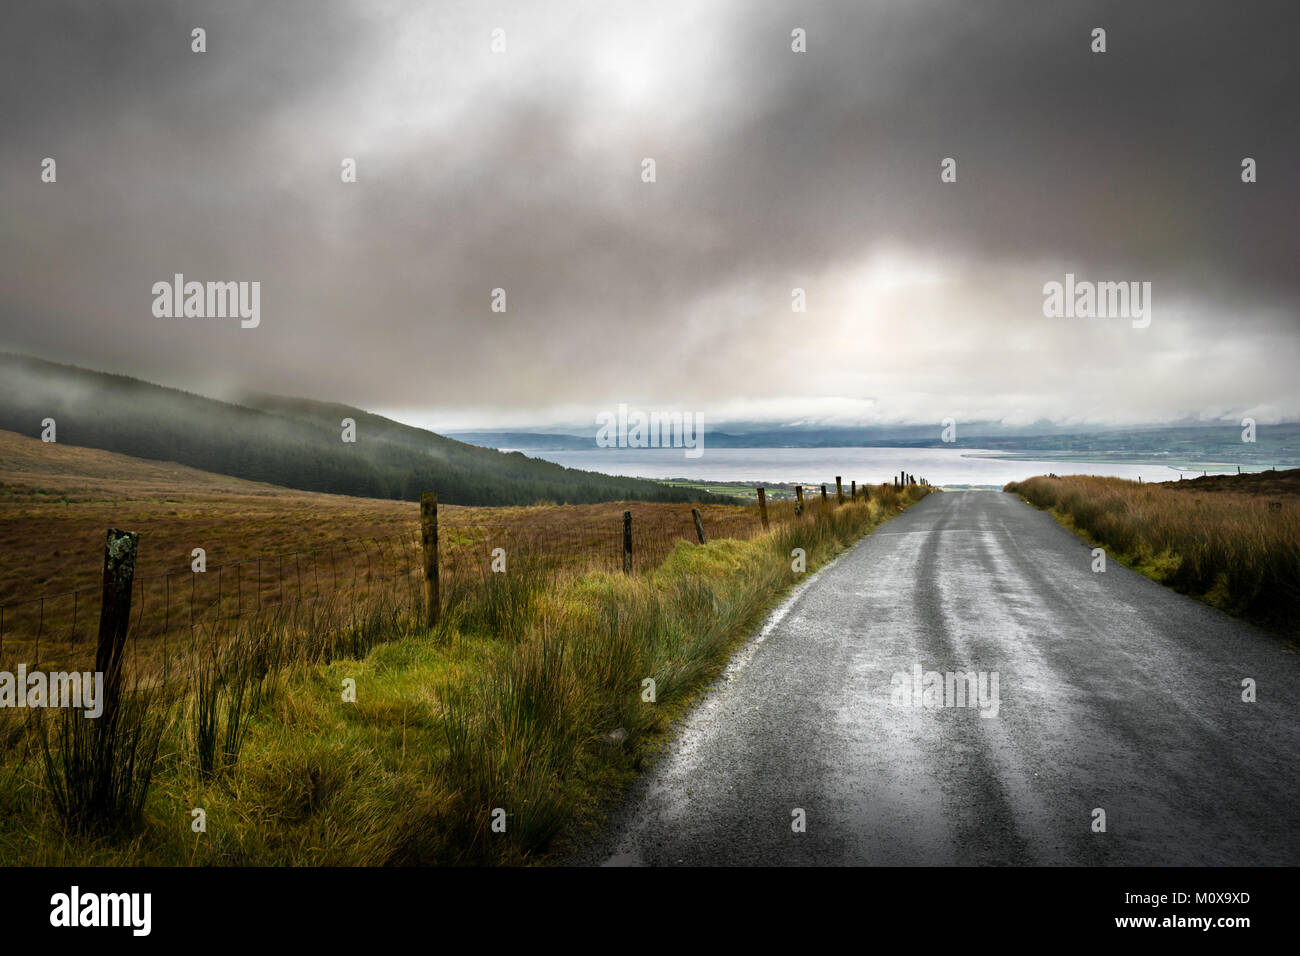 remote mountain road in Ireland with low lying rain clouds. Stock Photo